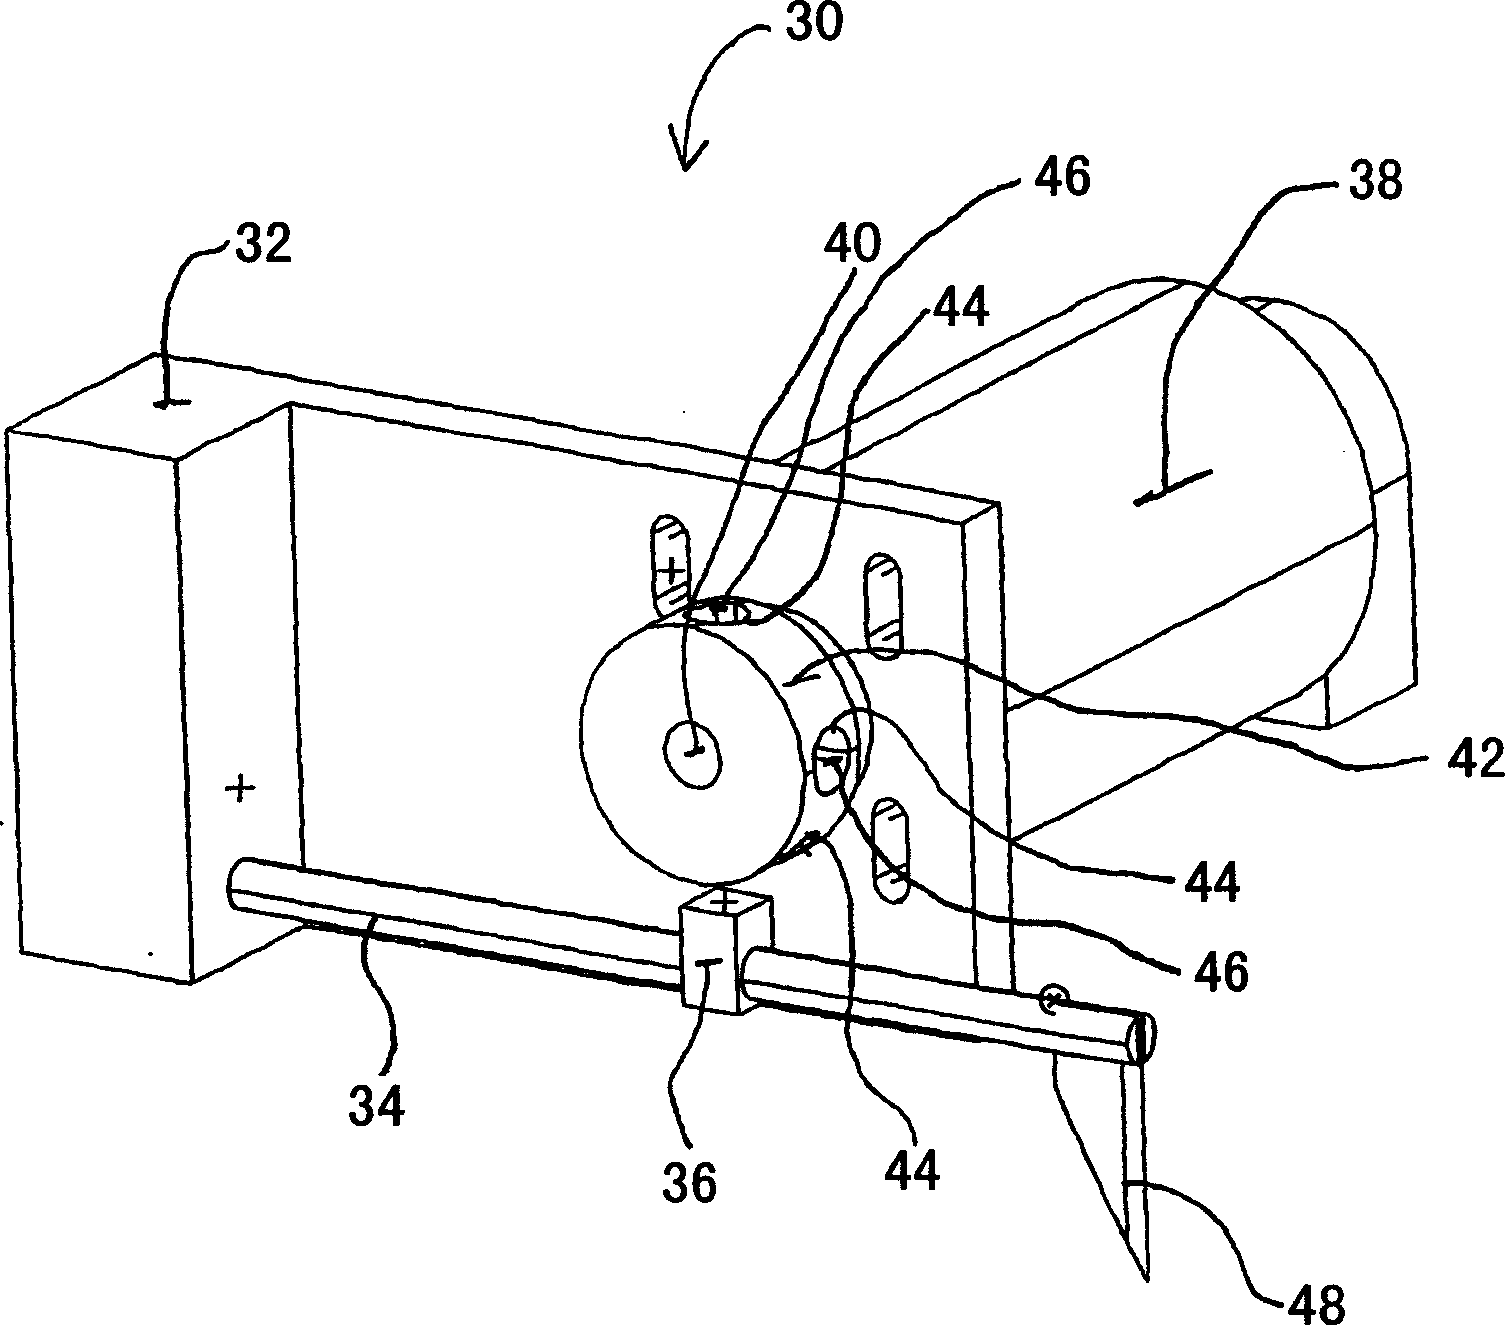 Apparatus and method for cutting sheet-type work material using a blade reciprocated via a tuned resonator